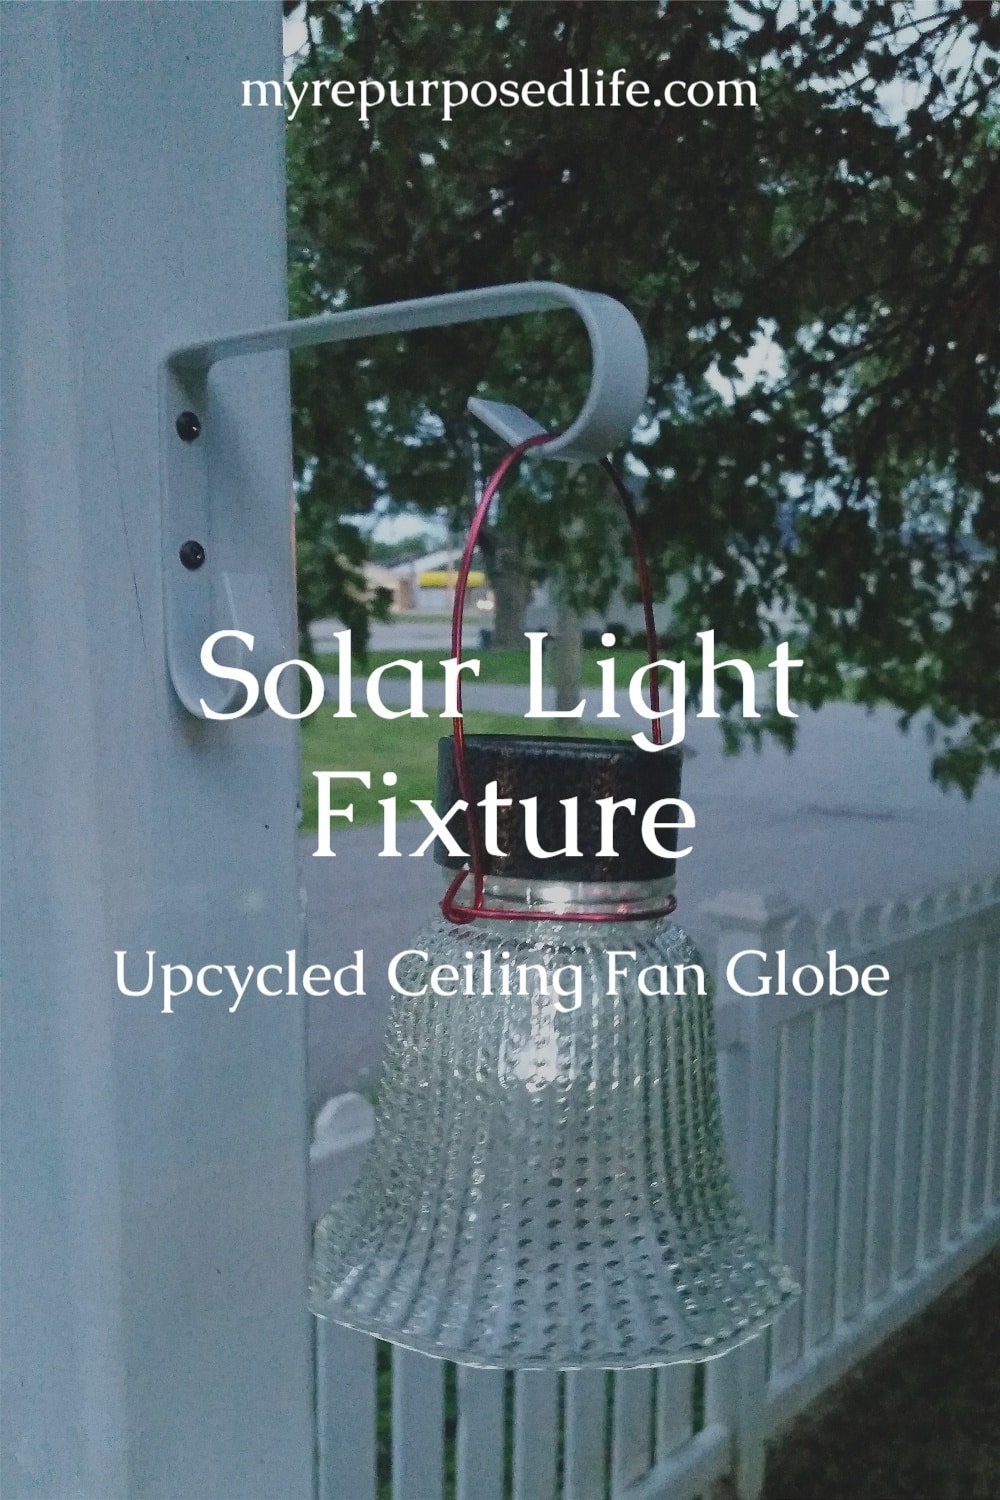 Ceiling fan glass globe solar lights are so easy and inexpensive to make. They are perfect for the patio, special events and weddings. Make some today! #MyRepurposedLife #repurposed #ceiling #fan #globes #solar #lighting via @repurposedlife